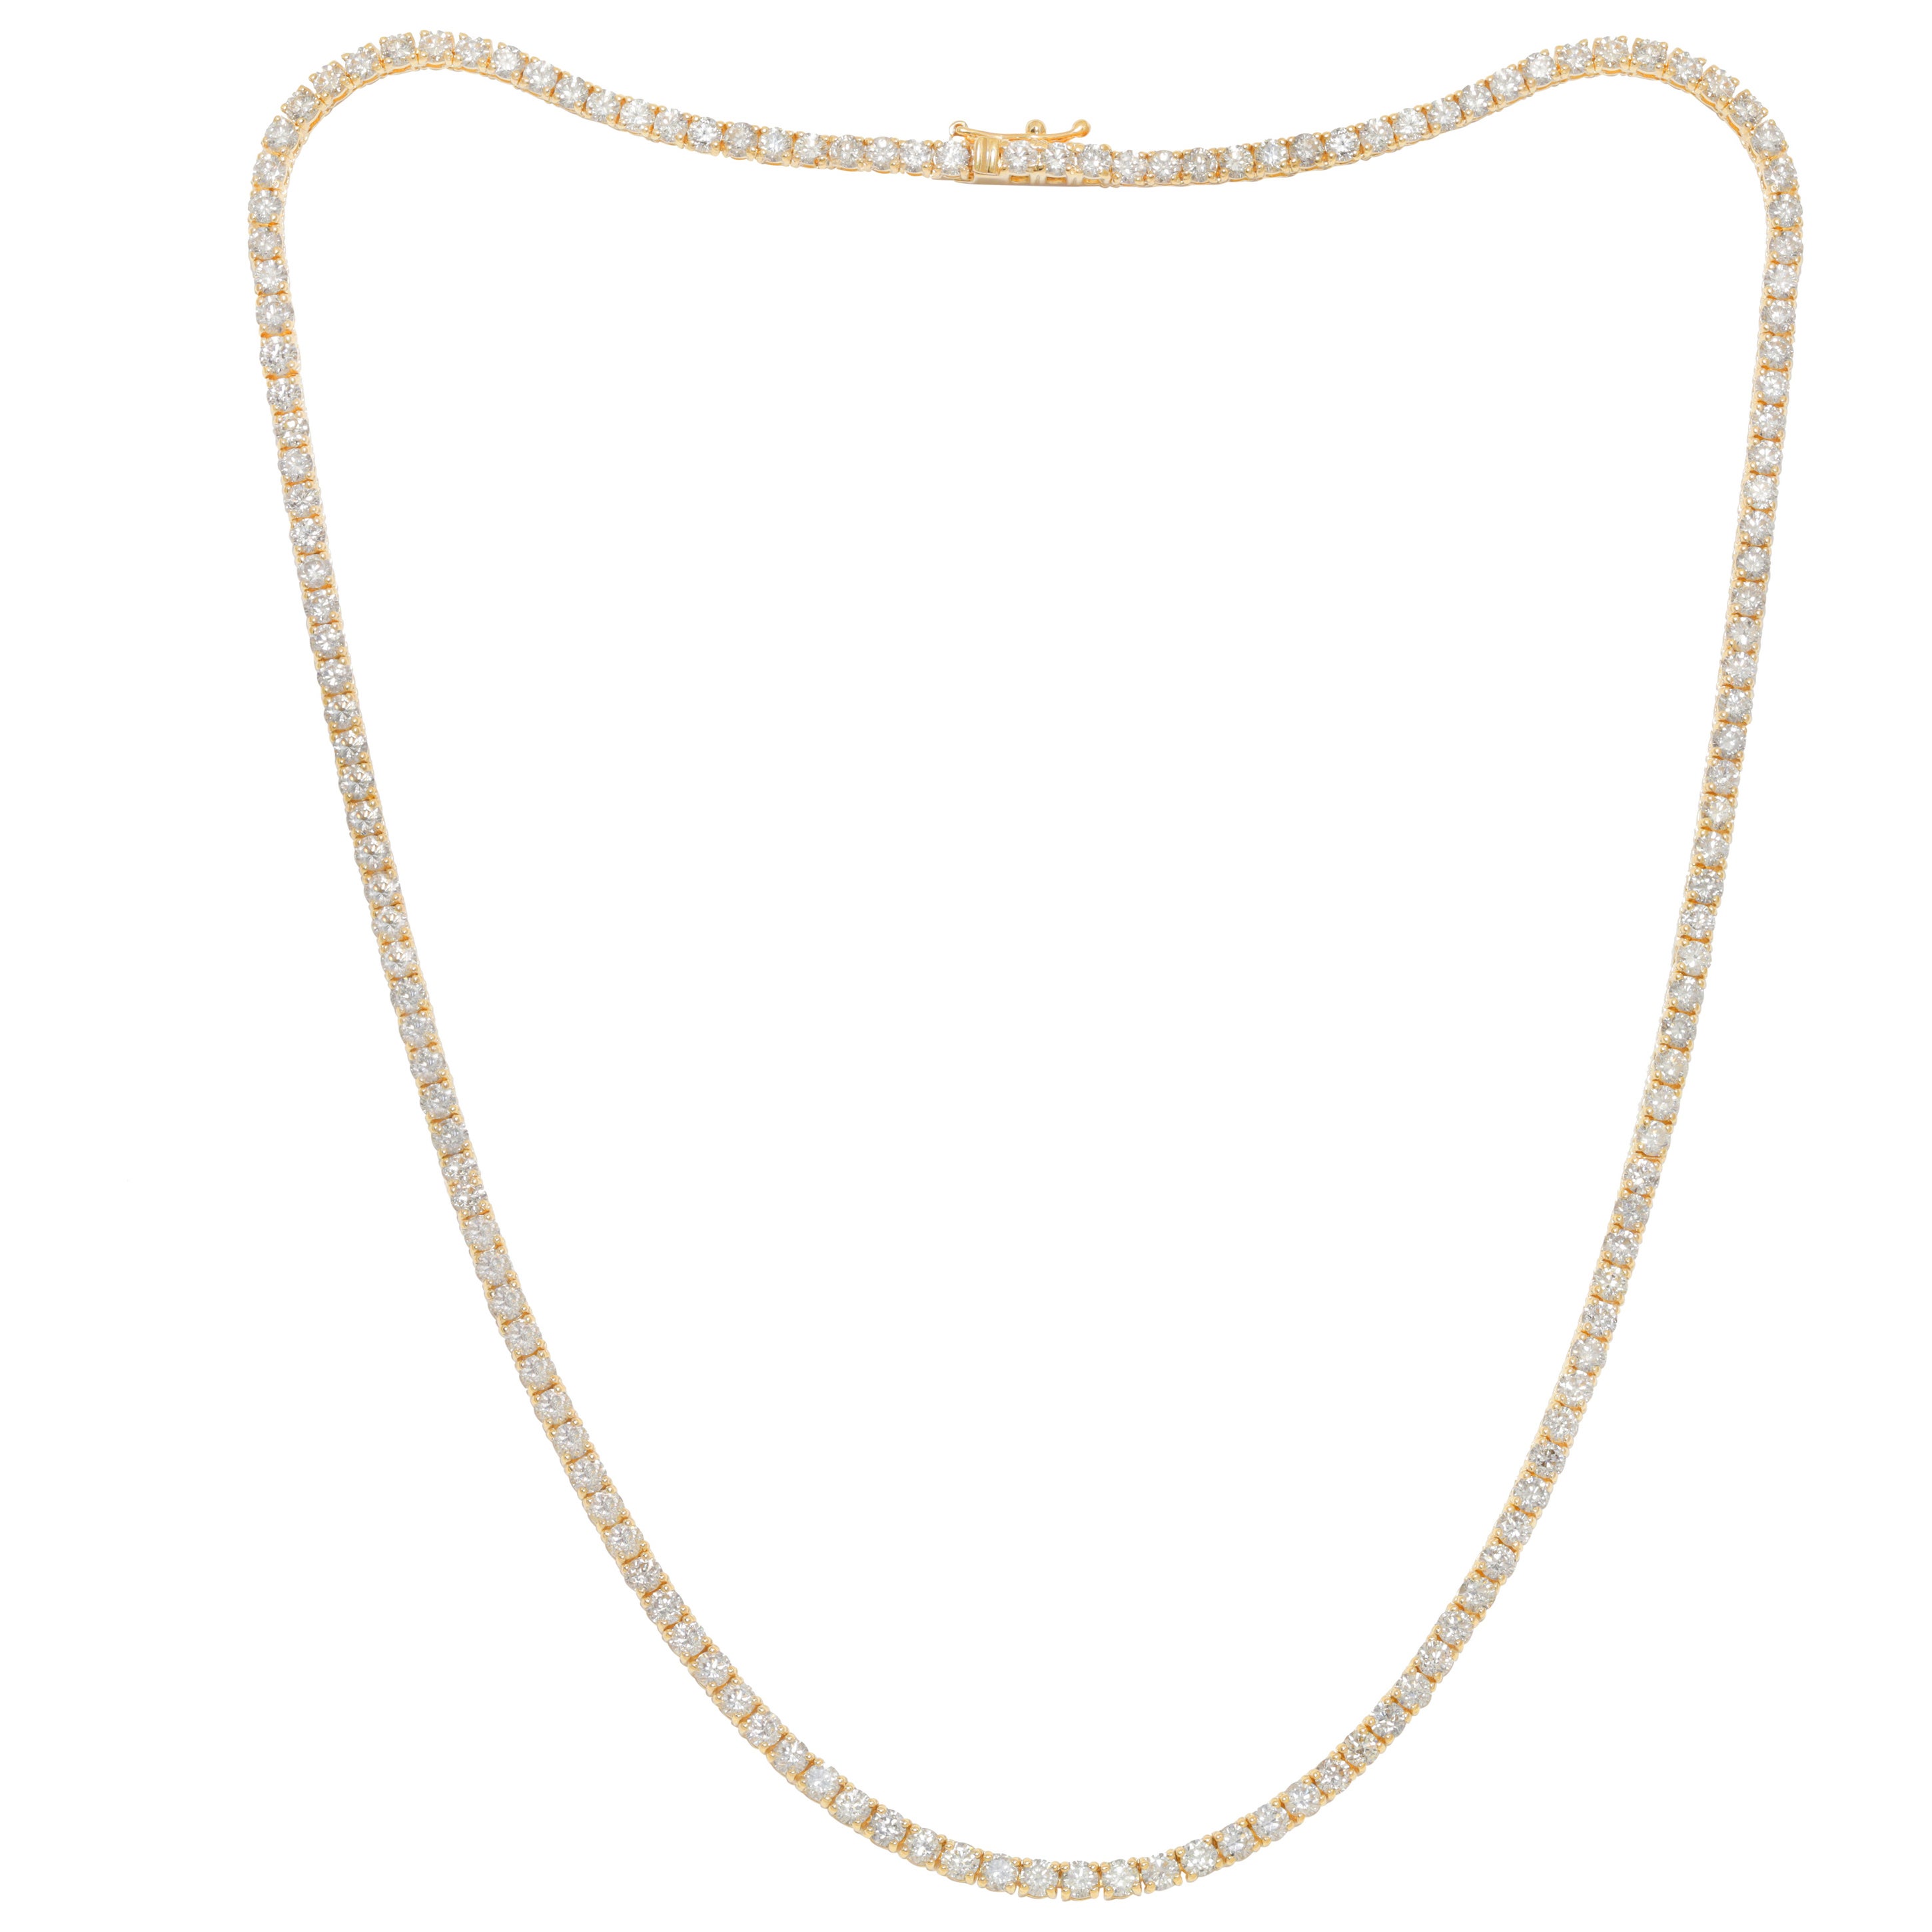 14K Yellow Gold Diamond Straight Line Tennis Necklace 11.75CTS